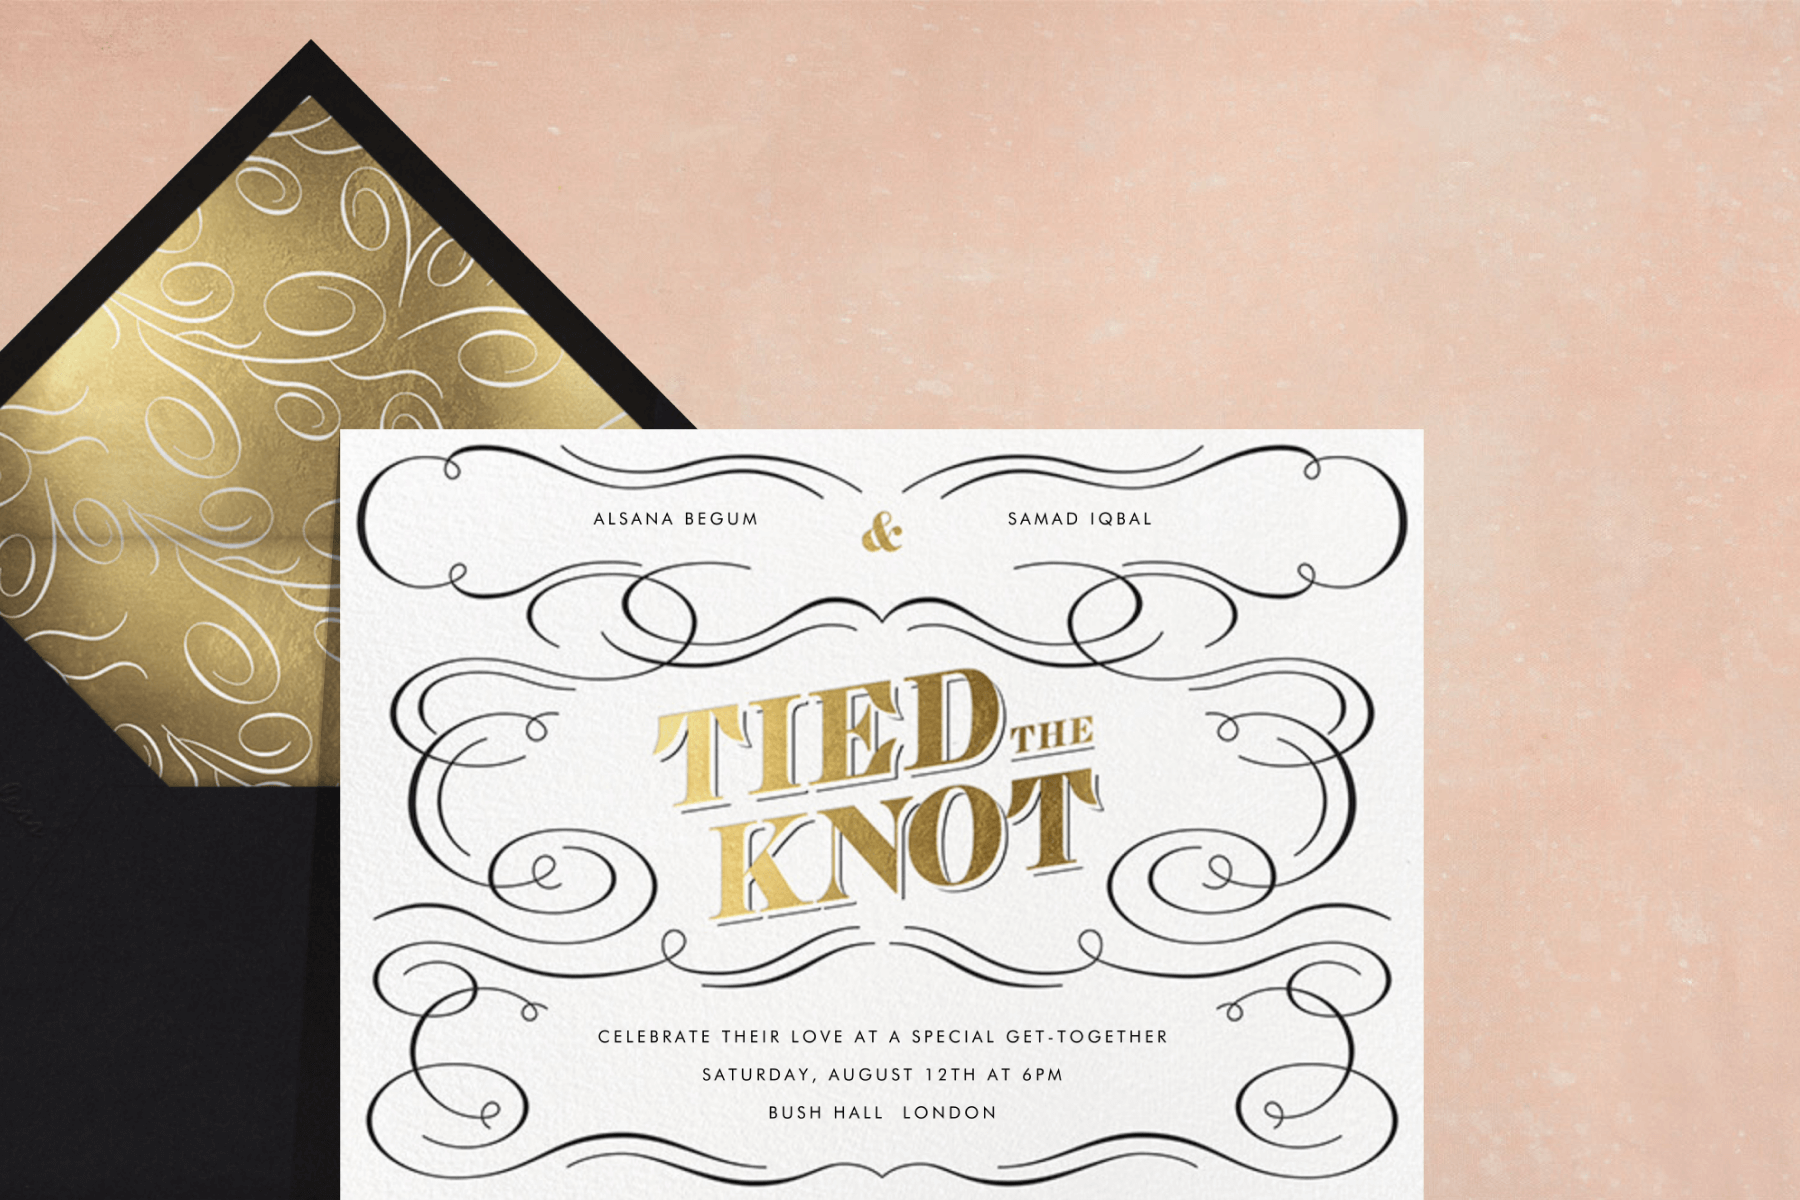 A wedding invitation featuring black curlicues and the text “Tied the Knot” in gold.